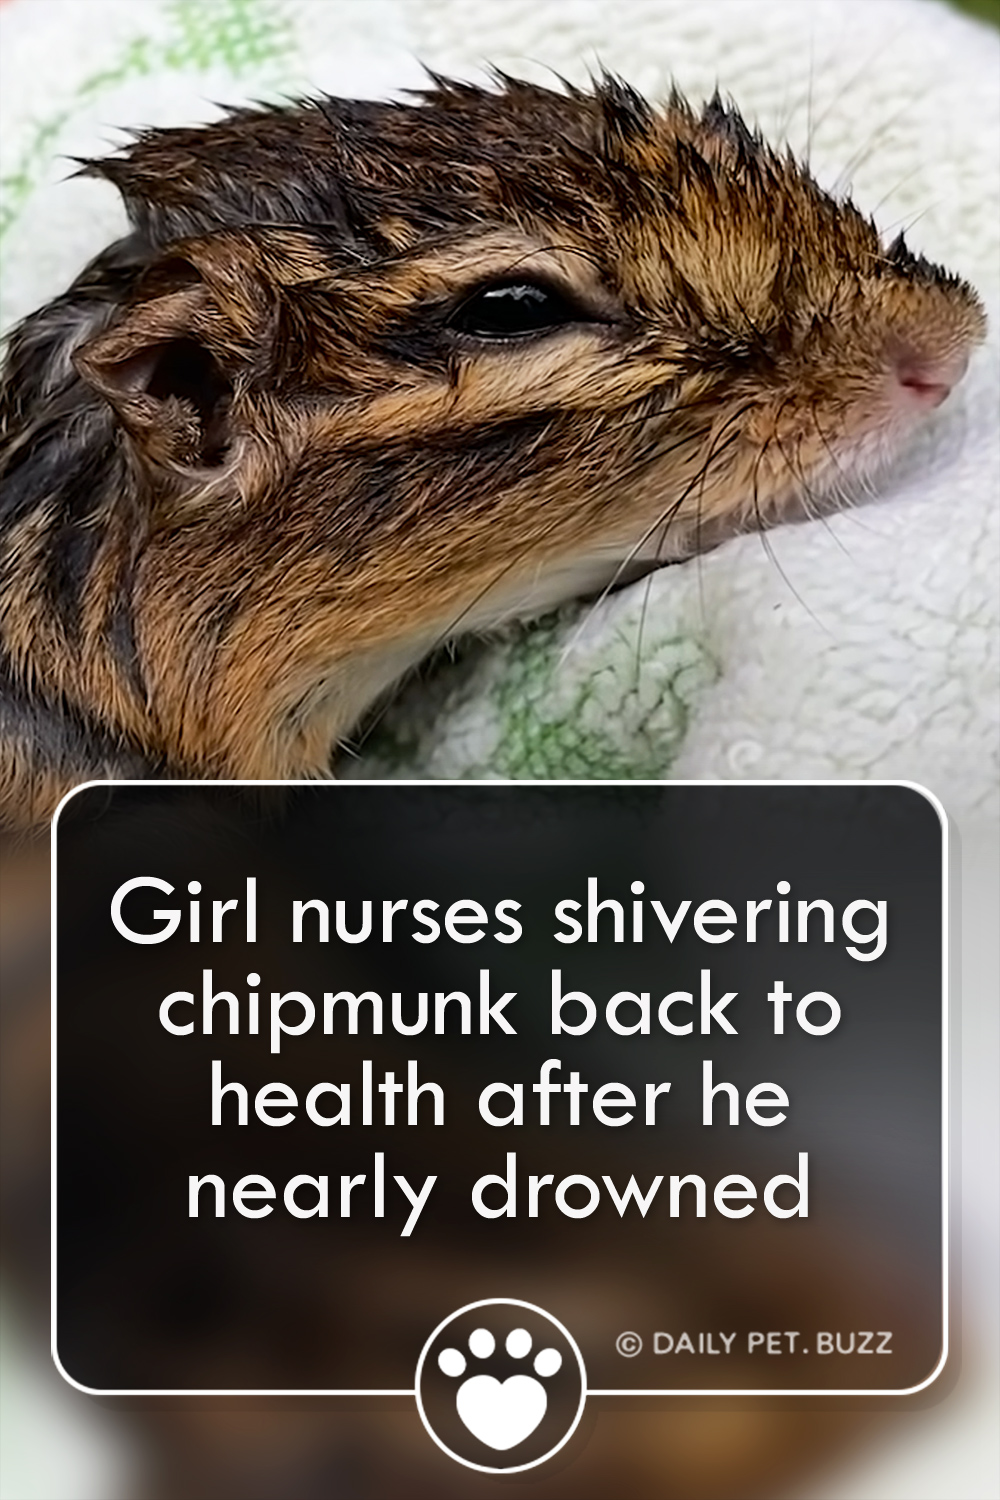 Girl nurses shivering chipmunk back to health after he nearly drowned